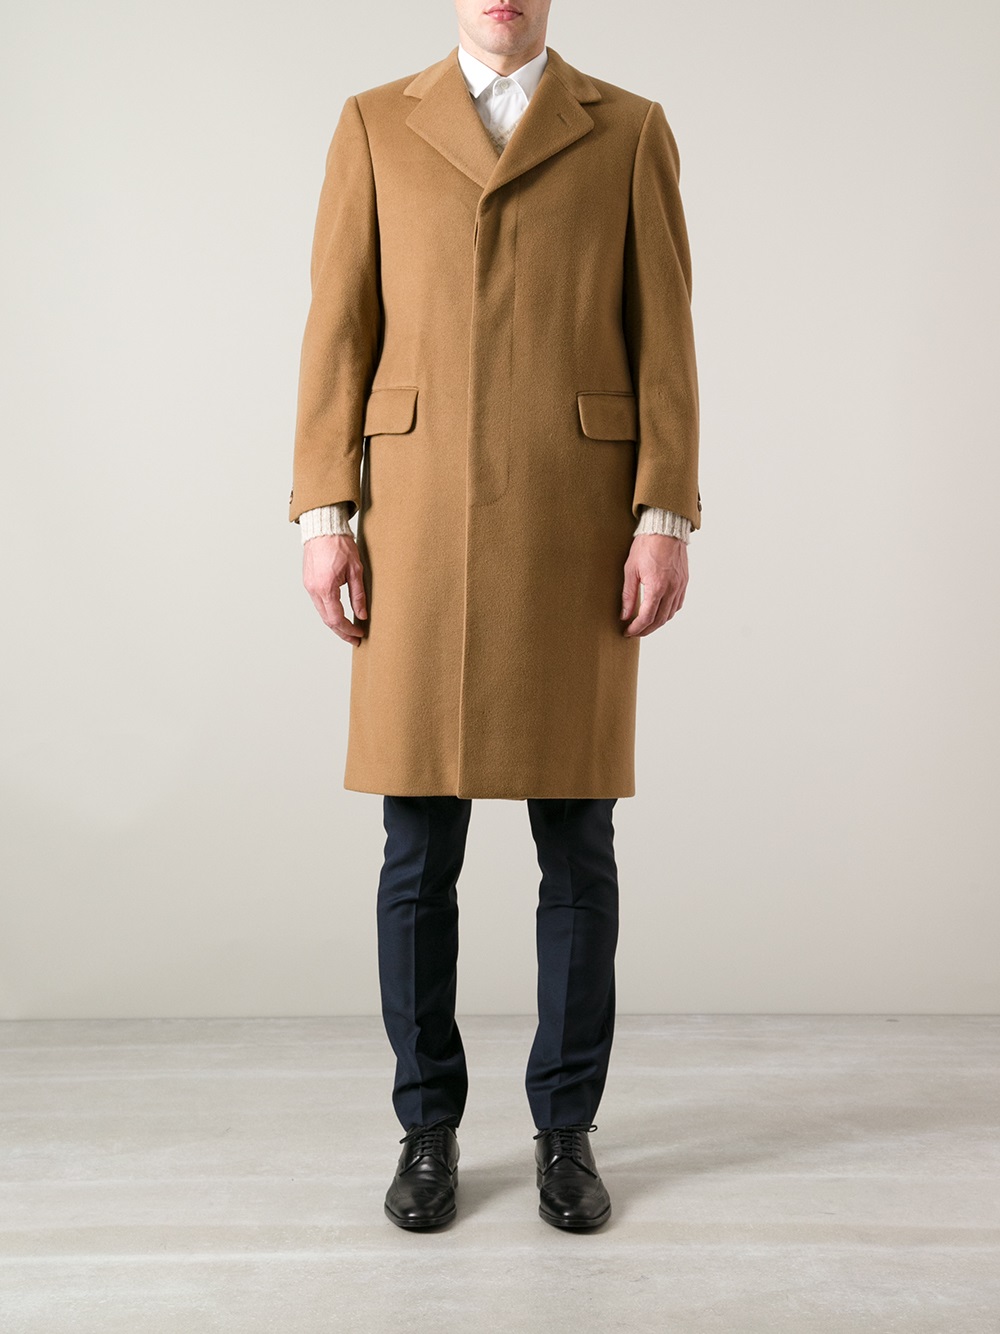 Aquascutum Cashmere and Wool Coat in Brown for Men - Lyst